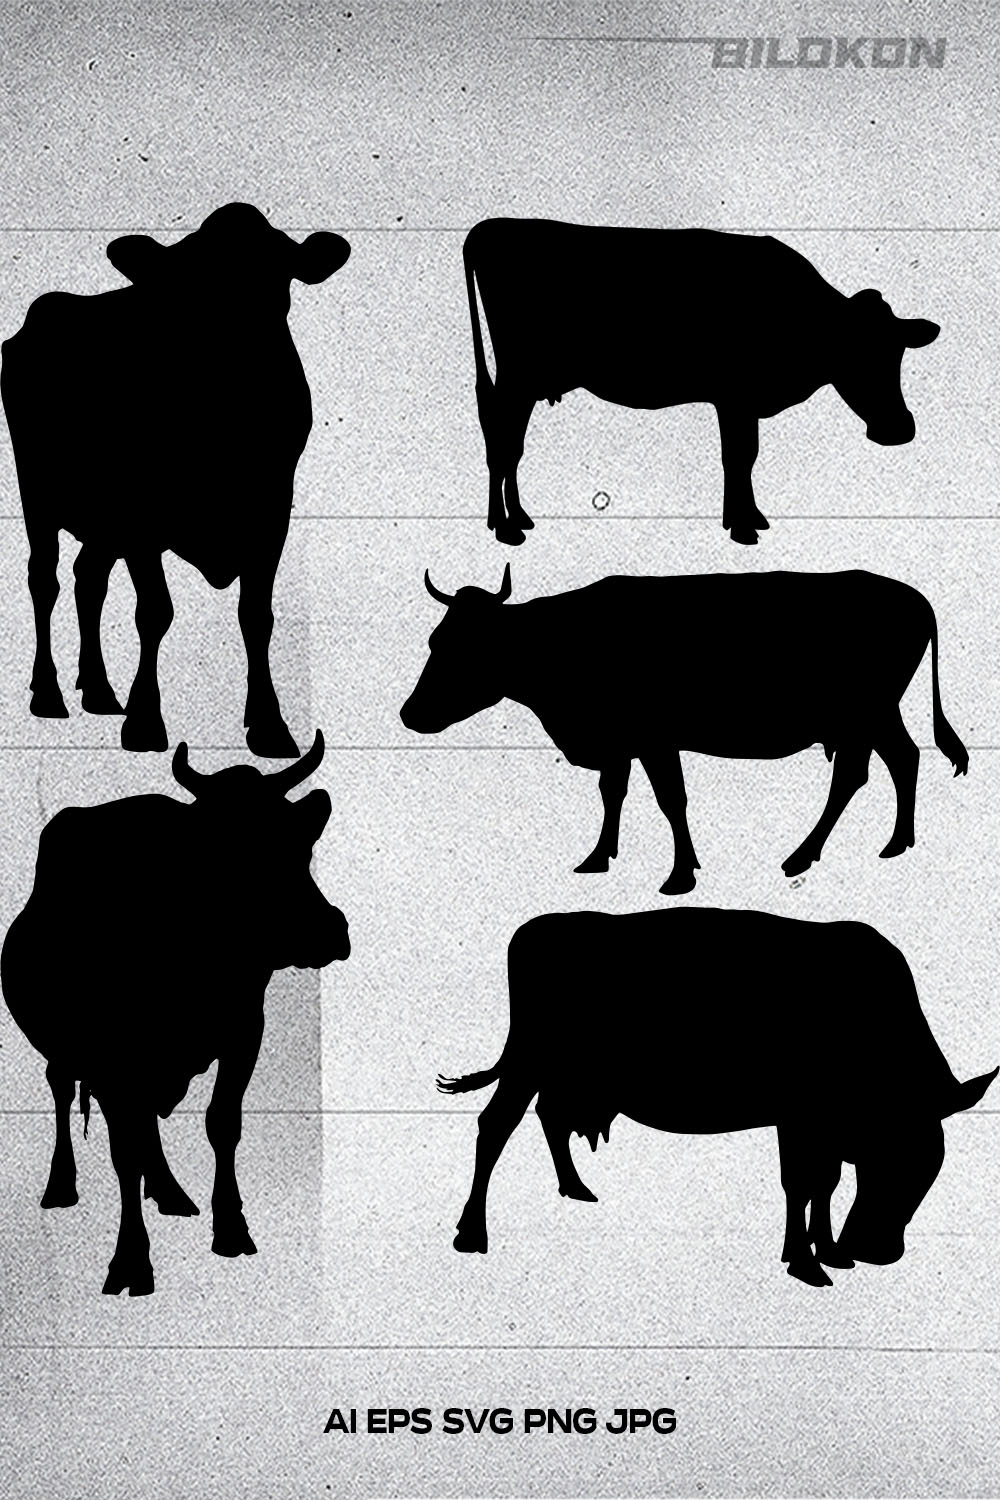 Black and white picture of cows and bulls.